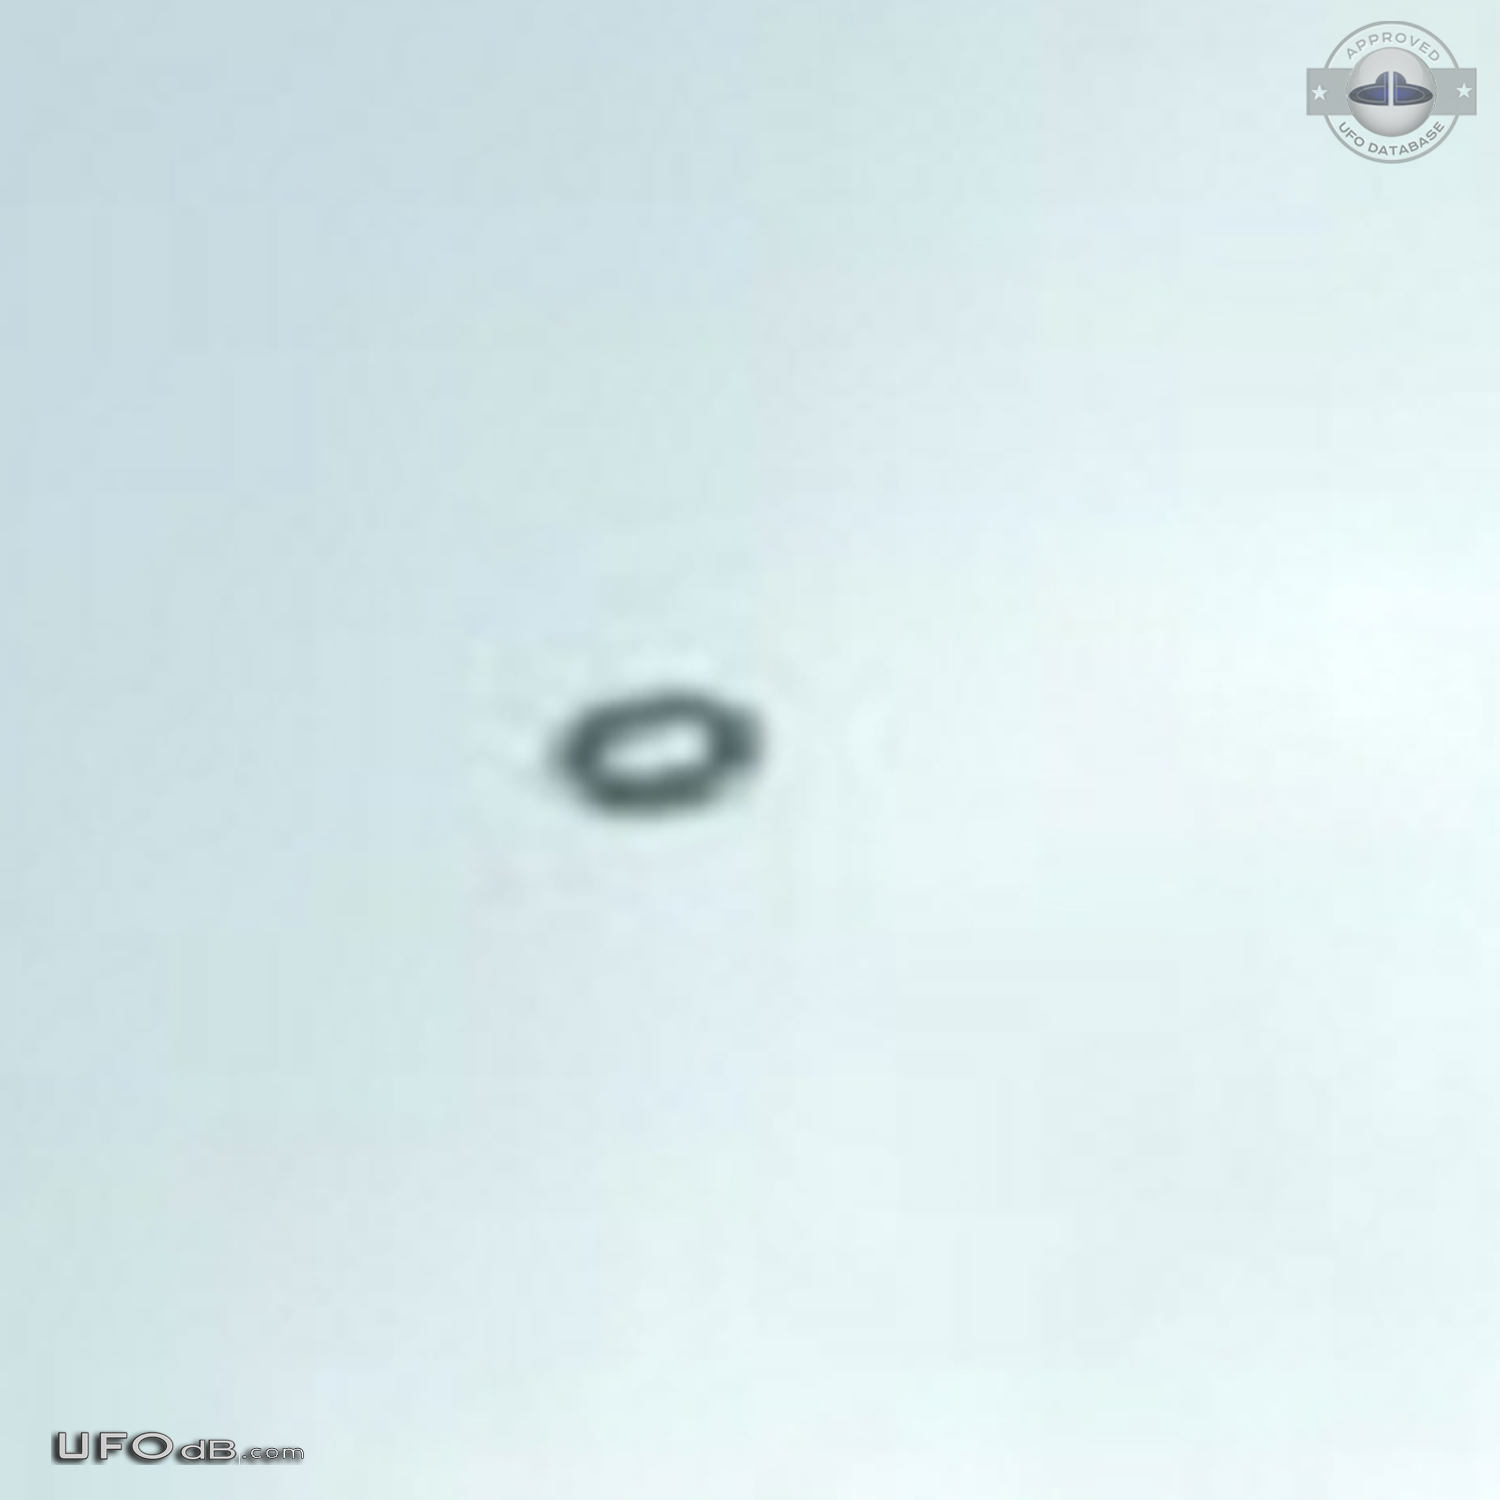 UK Ministry of Defence Helicopter Chases UFOs Above English Town UFO Picture #675-4